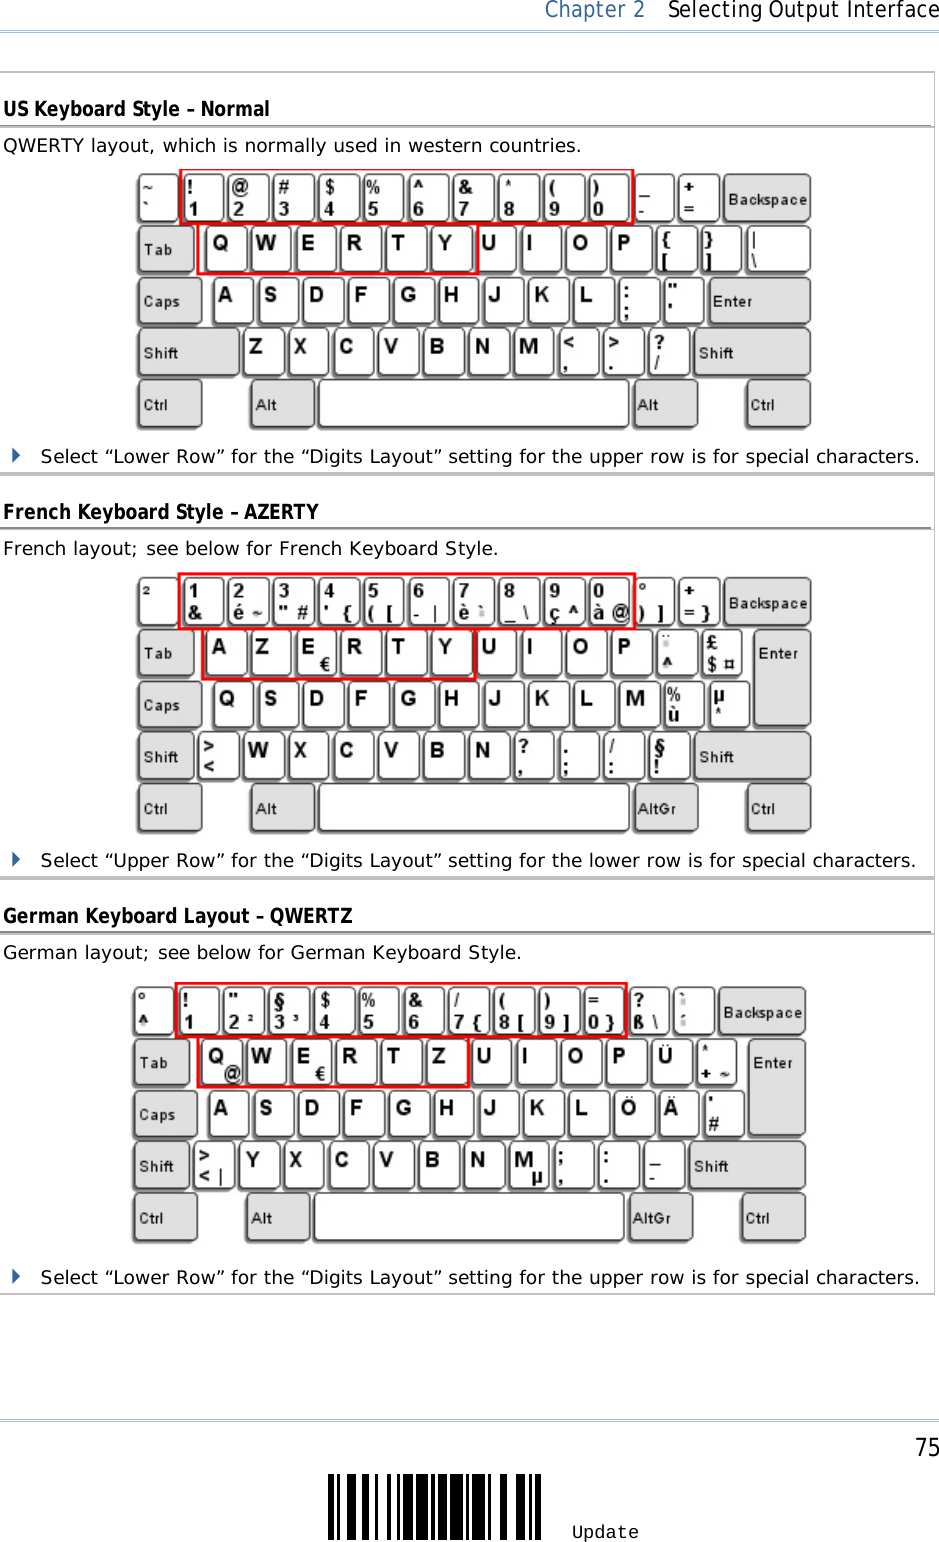     75 Update  Chapter 2  Selecting Output Interface US Keyboard Style – Normal QWERTY layout, which is normally used in western countries.                  Select “Lower Row” for the “Digits Layout” setting for the upper row is for special characters.  French Keyboard Style – AZERTY French layout; see below for French Keyboard Style.                  Select “Upper Row” for the “Digits Layout” setting for the lower row is for special characters.  German Keyboard Layout – QWERTZ German layout; see below for German Keyboard Style.                Select “Lower Row” for the “Digits Layout” setting for the upper row is for special characters.     